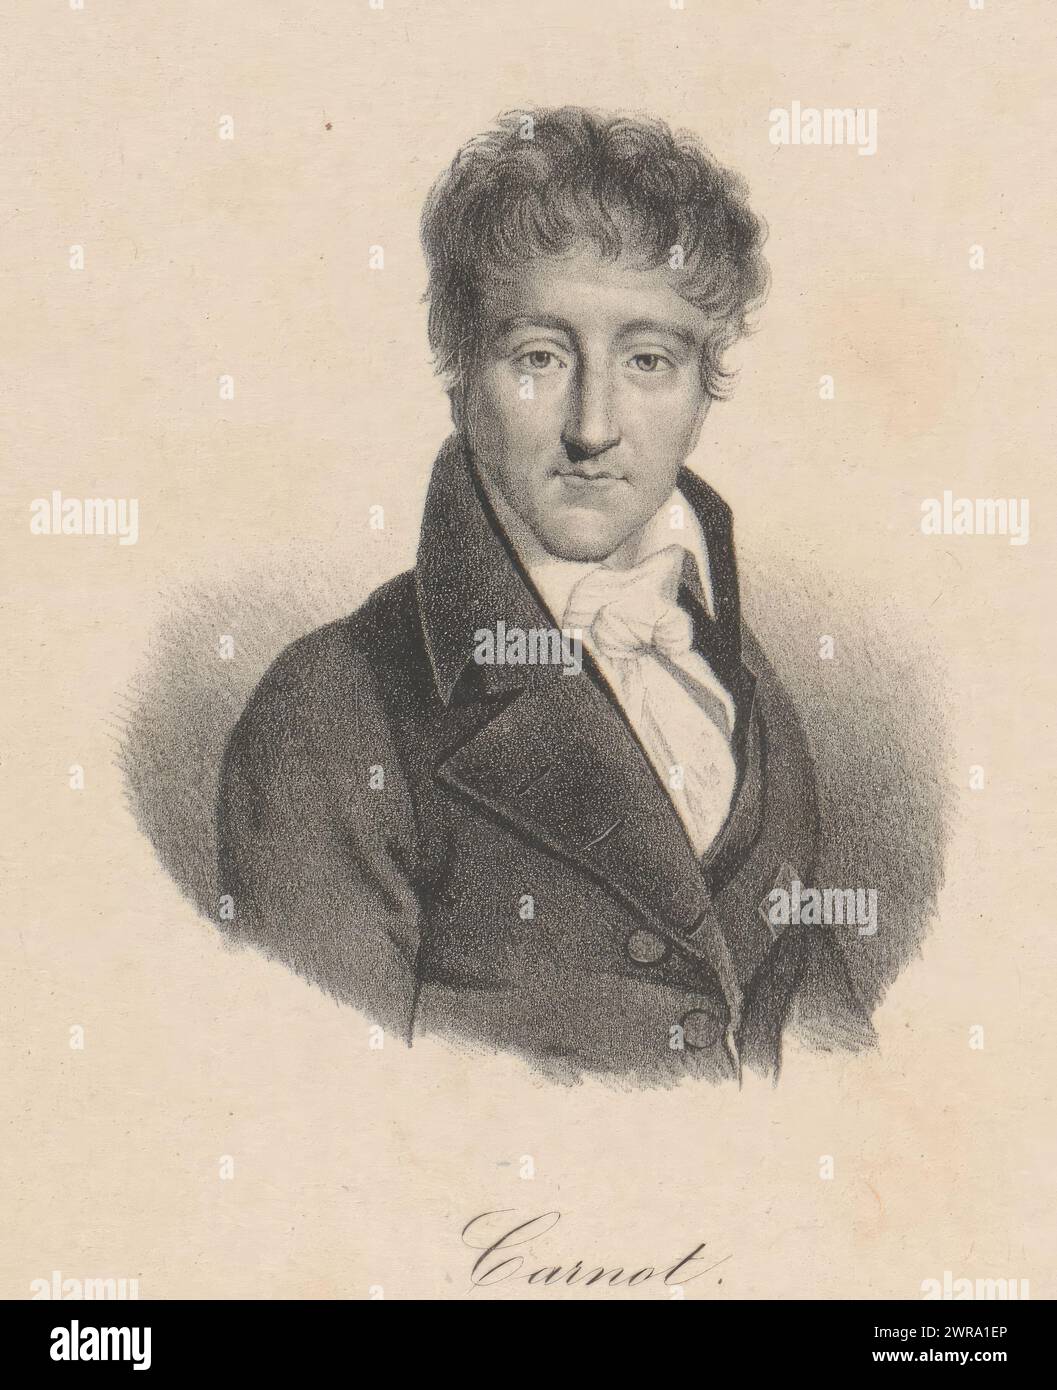 Portrait of Lazare Carnot, Carnot (title on object), print maker: anonymous, after painting by: Louis-Léopold Boilly, printer: veuve Delpech (Naudet), Paris, in or after 1818 - in or before 1842, paper, height 270 mm × width 177 mm, print Stock Photo